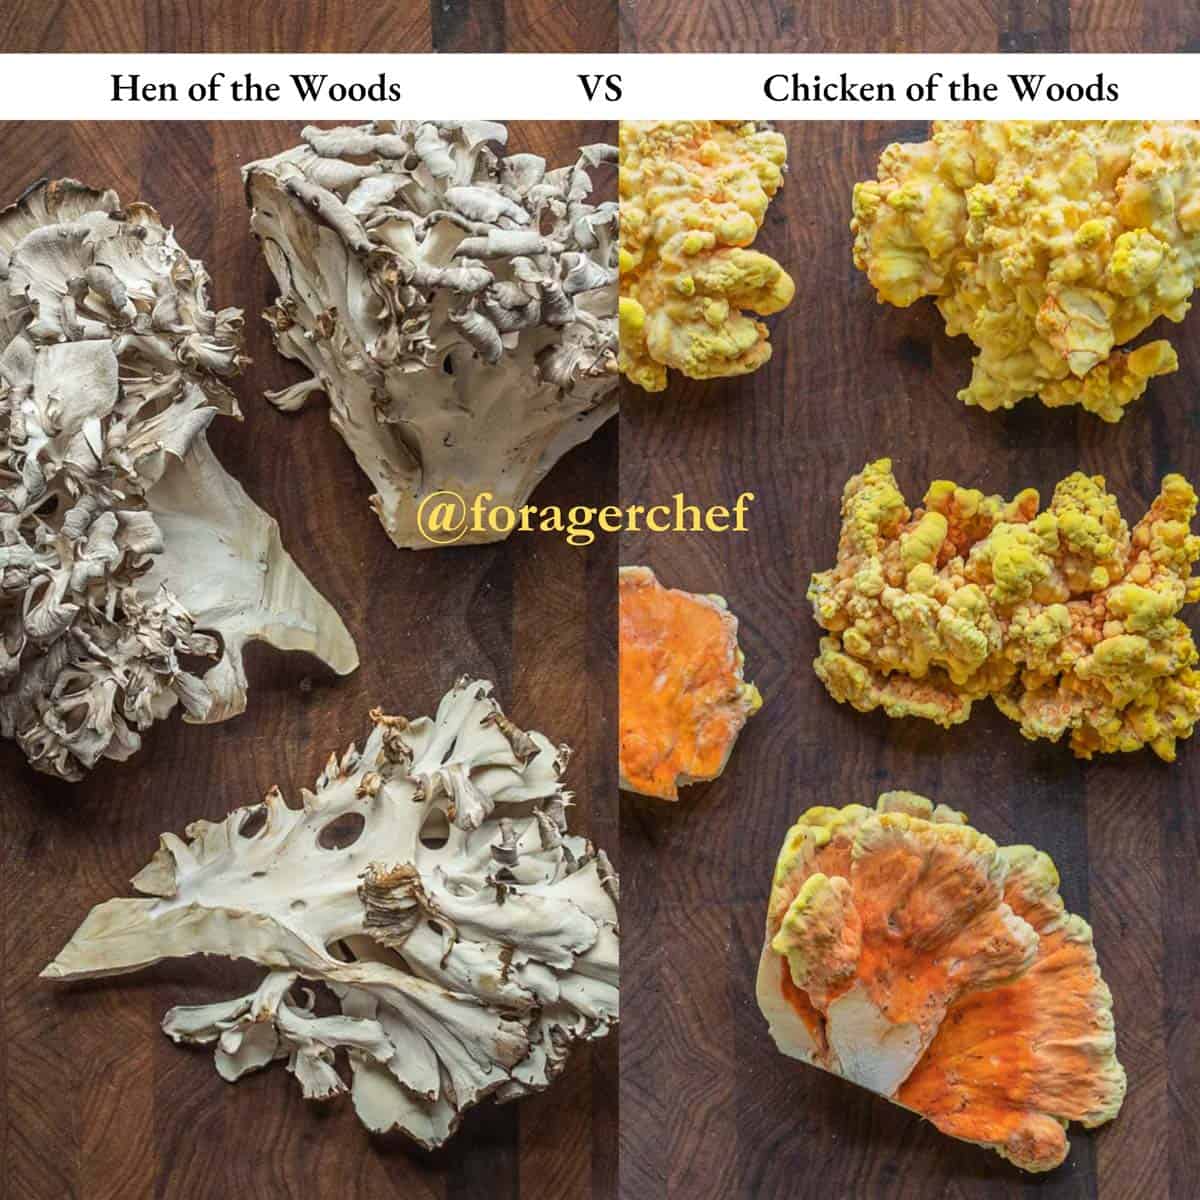 Chicken of the woods vs hen of the woods 1 Chicken of the Woods Mushrooms: The Laetiporus